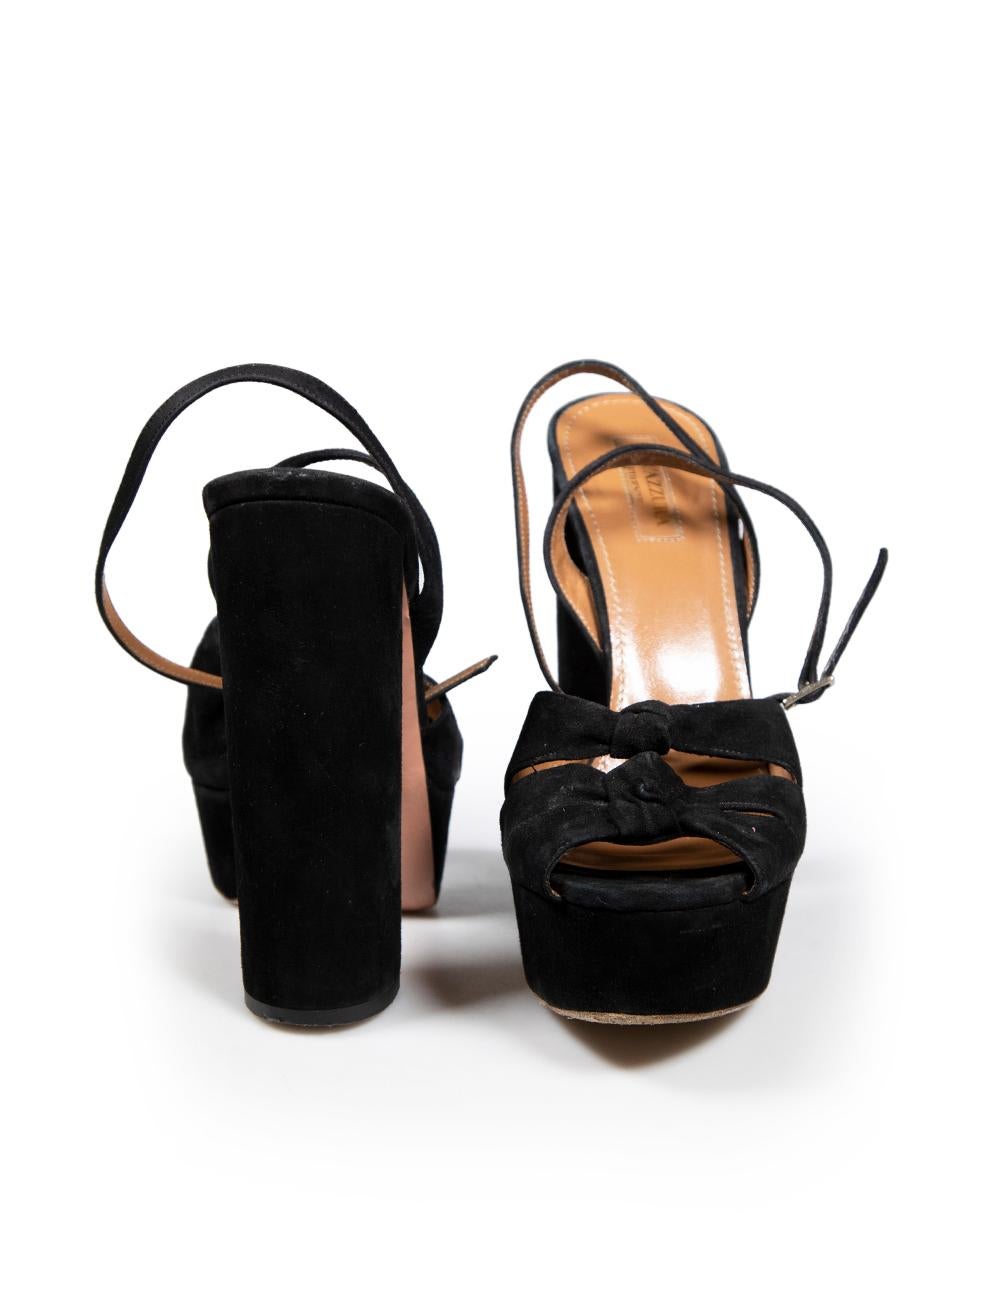 Aquazzura Black Suede Knot Platform Heels Size IT 39 In Good Condition For Sale In London, GB